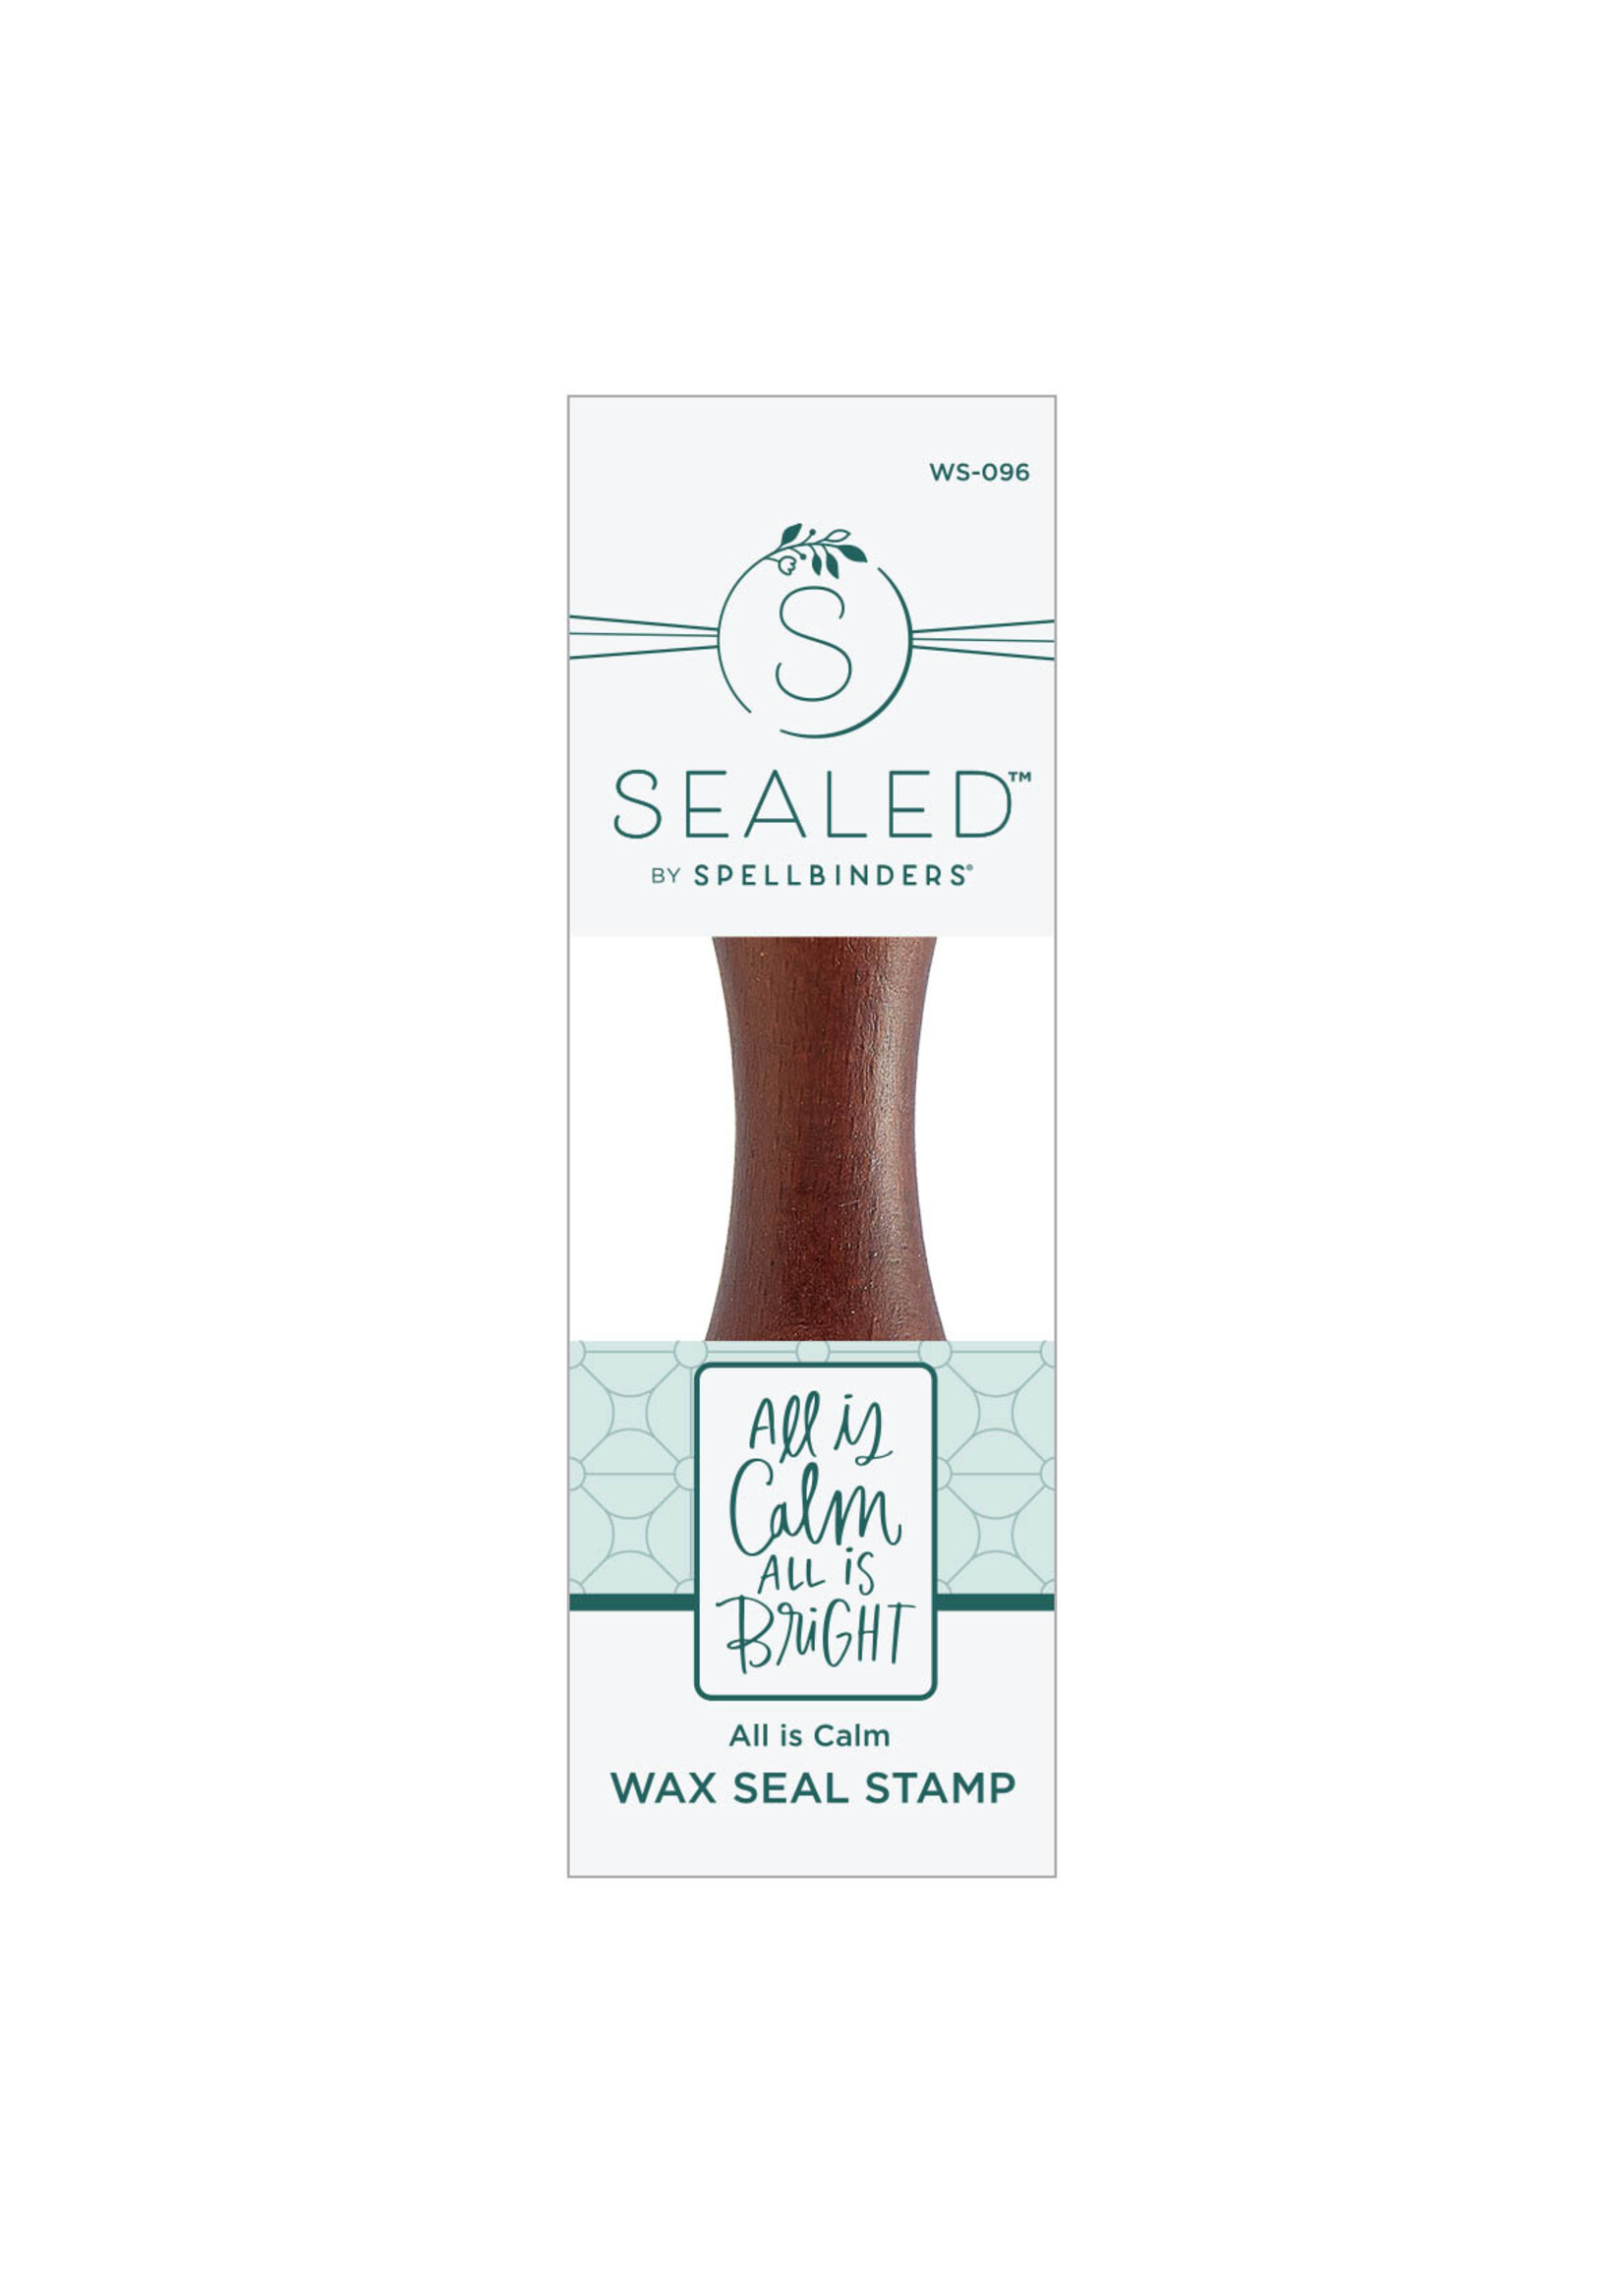 spellbinders All Is Calm Wax Seal Stamp from the Sealed for Christmas Collection